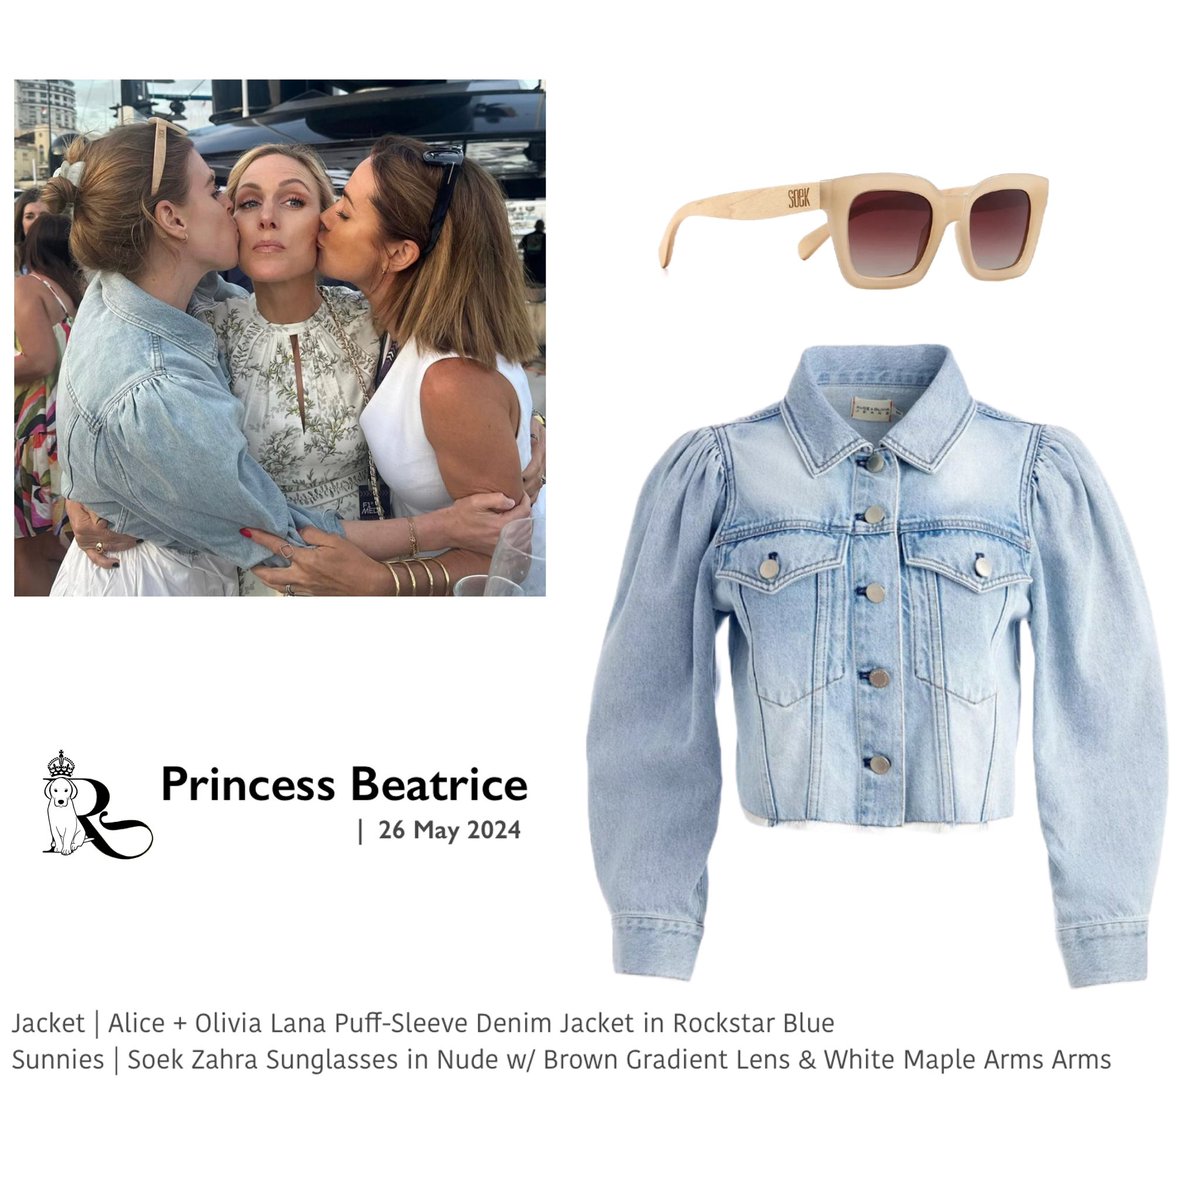 It appears that Princess Beatrice was also in attendance at The Green Room Yacht viewing party for this past weekend’s F1 Monaco Grand Prix. If we get more photos, I will attempt to identify the rest of her outfit. This photo is also from Natalie Pinkham’s IG account